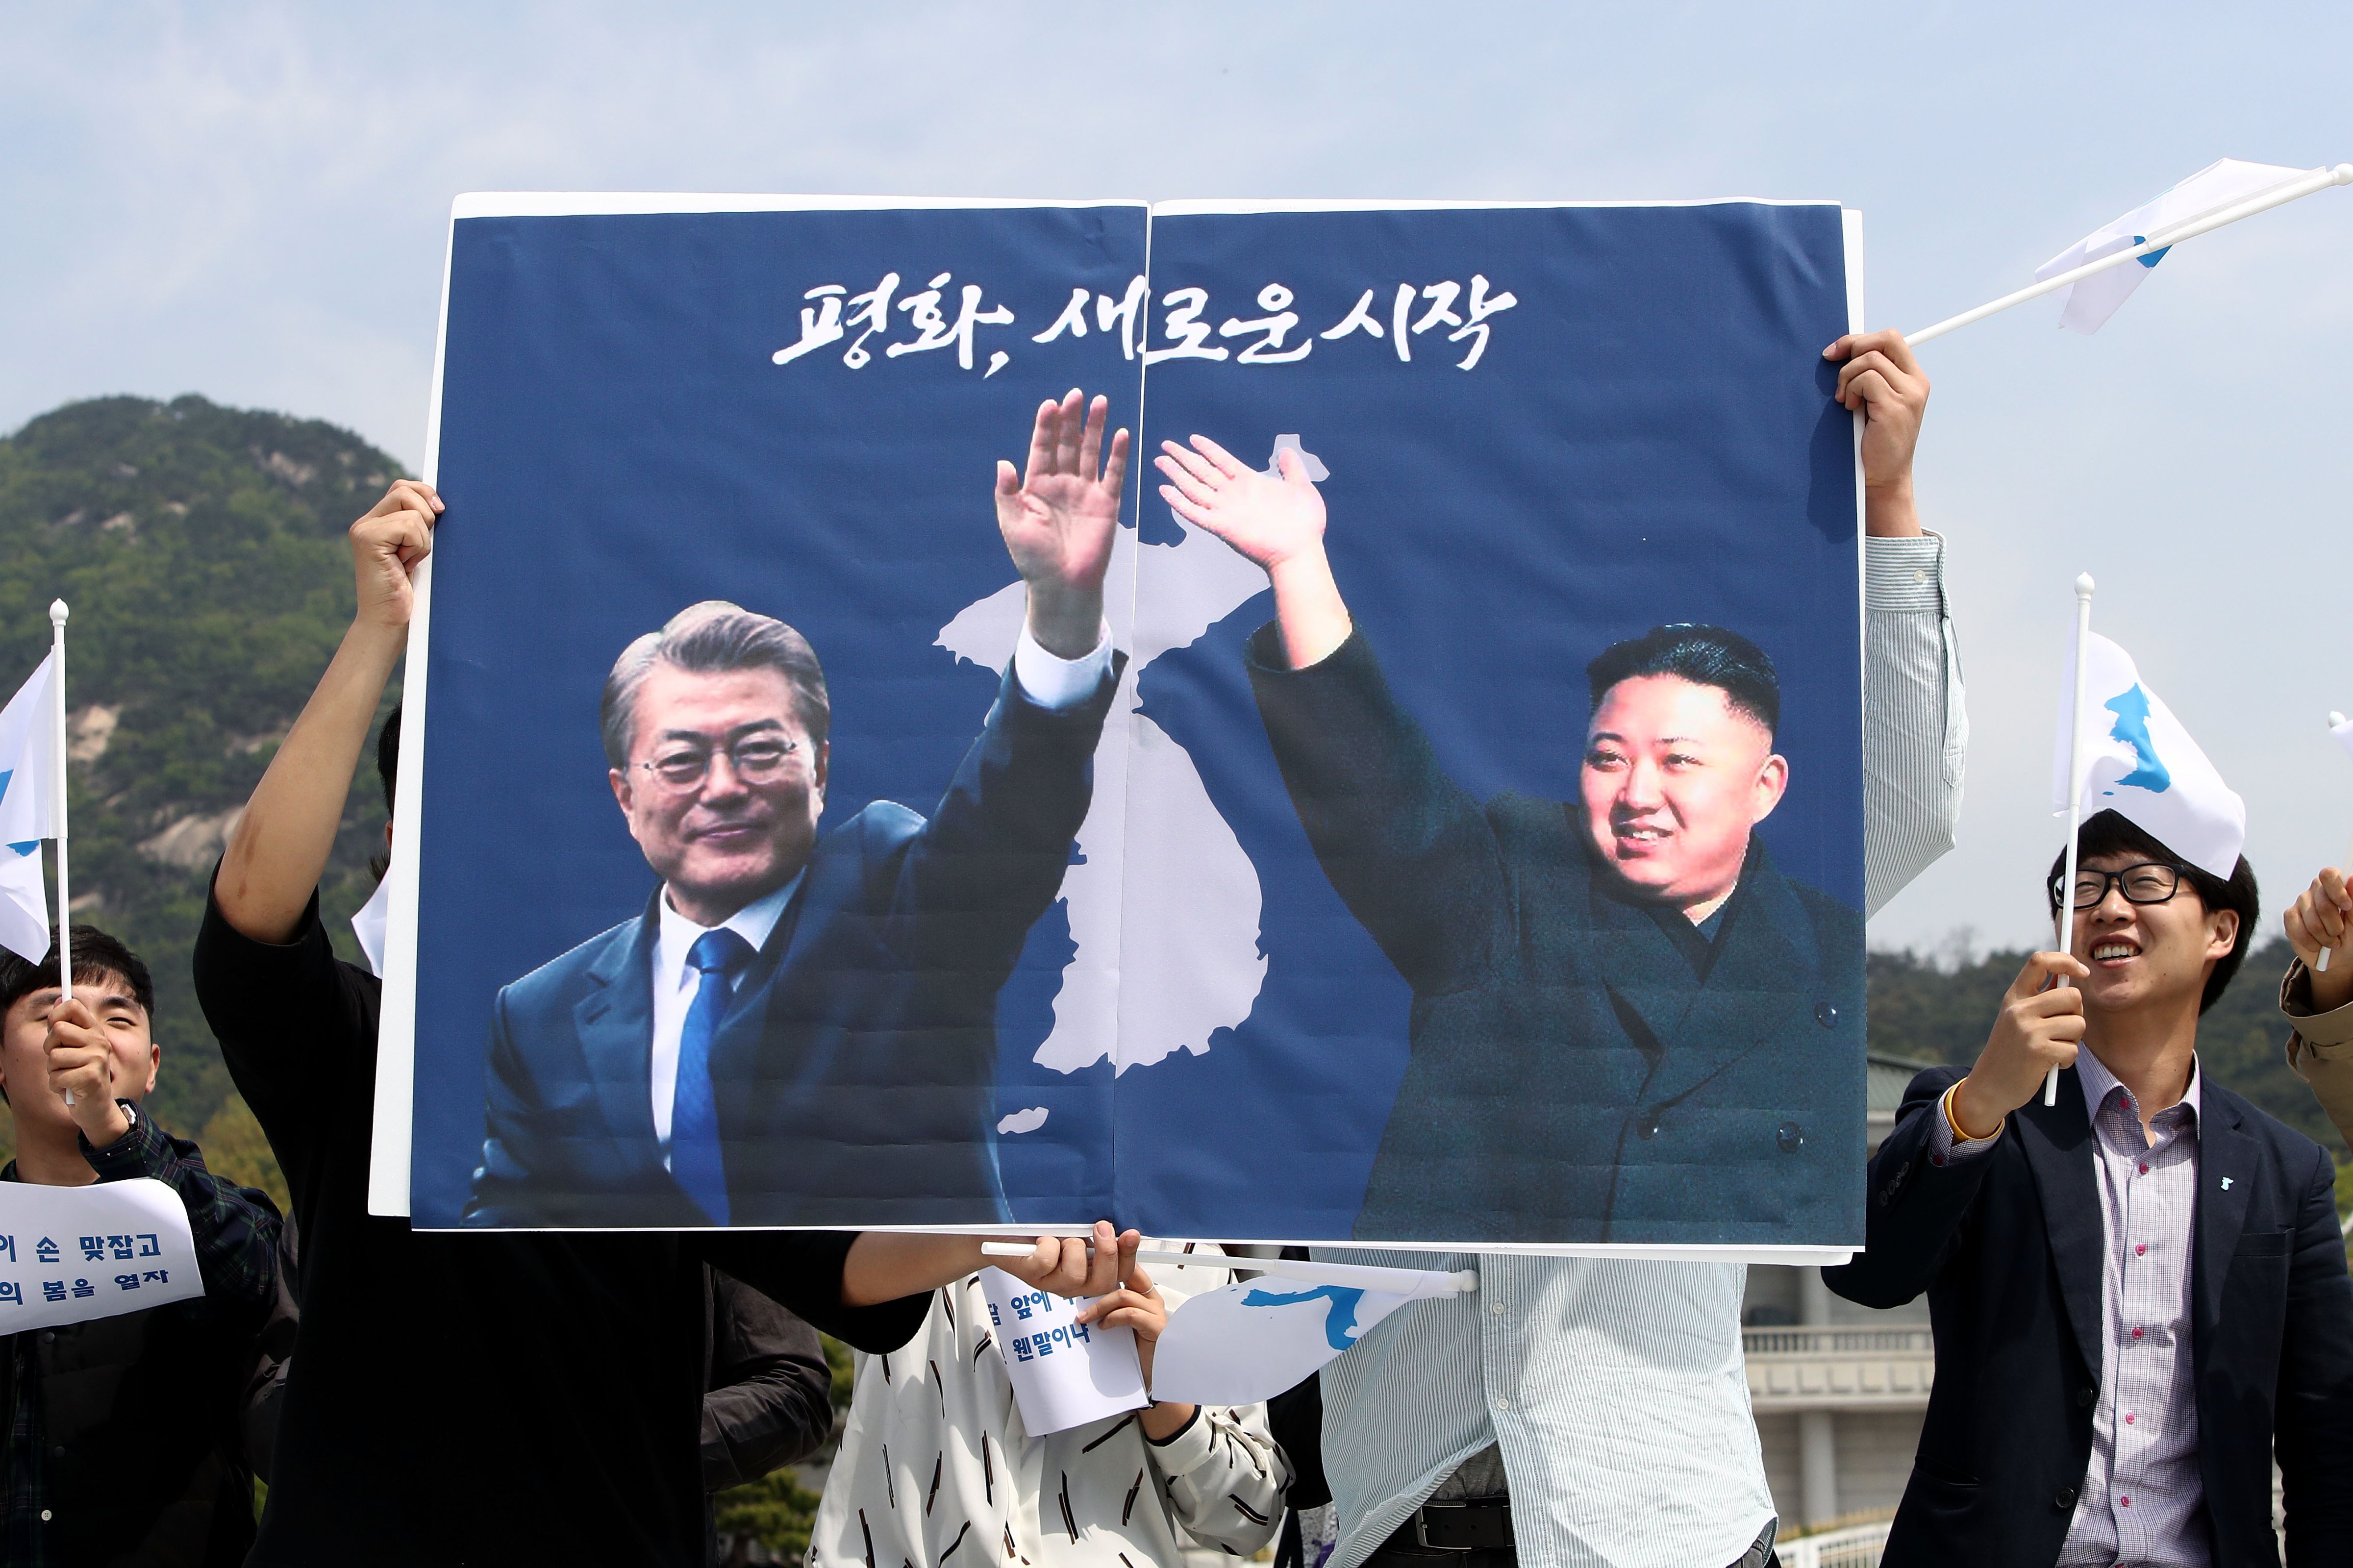 South Koreans hold up placards of South Korean President Moon Jae-In and North Korean leader Kim Jung-Un in front of Presidential Blue House  in Seoul, South Korea on April 26, 2018. (Chung Sung-Jun—Getty Images)